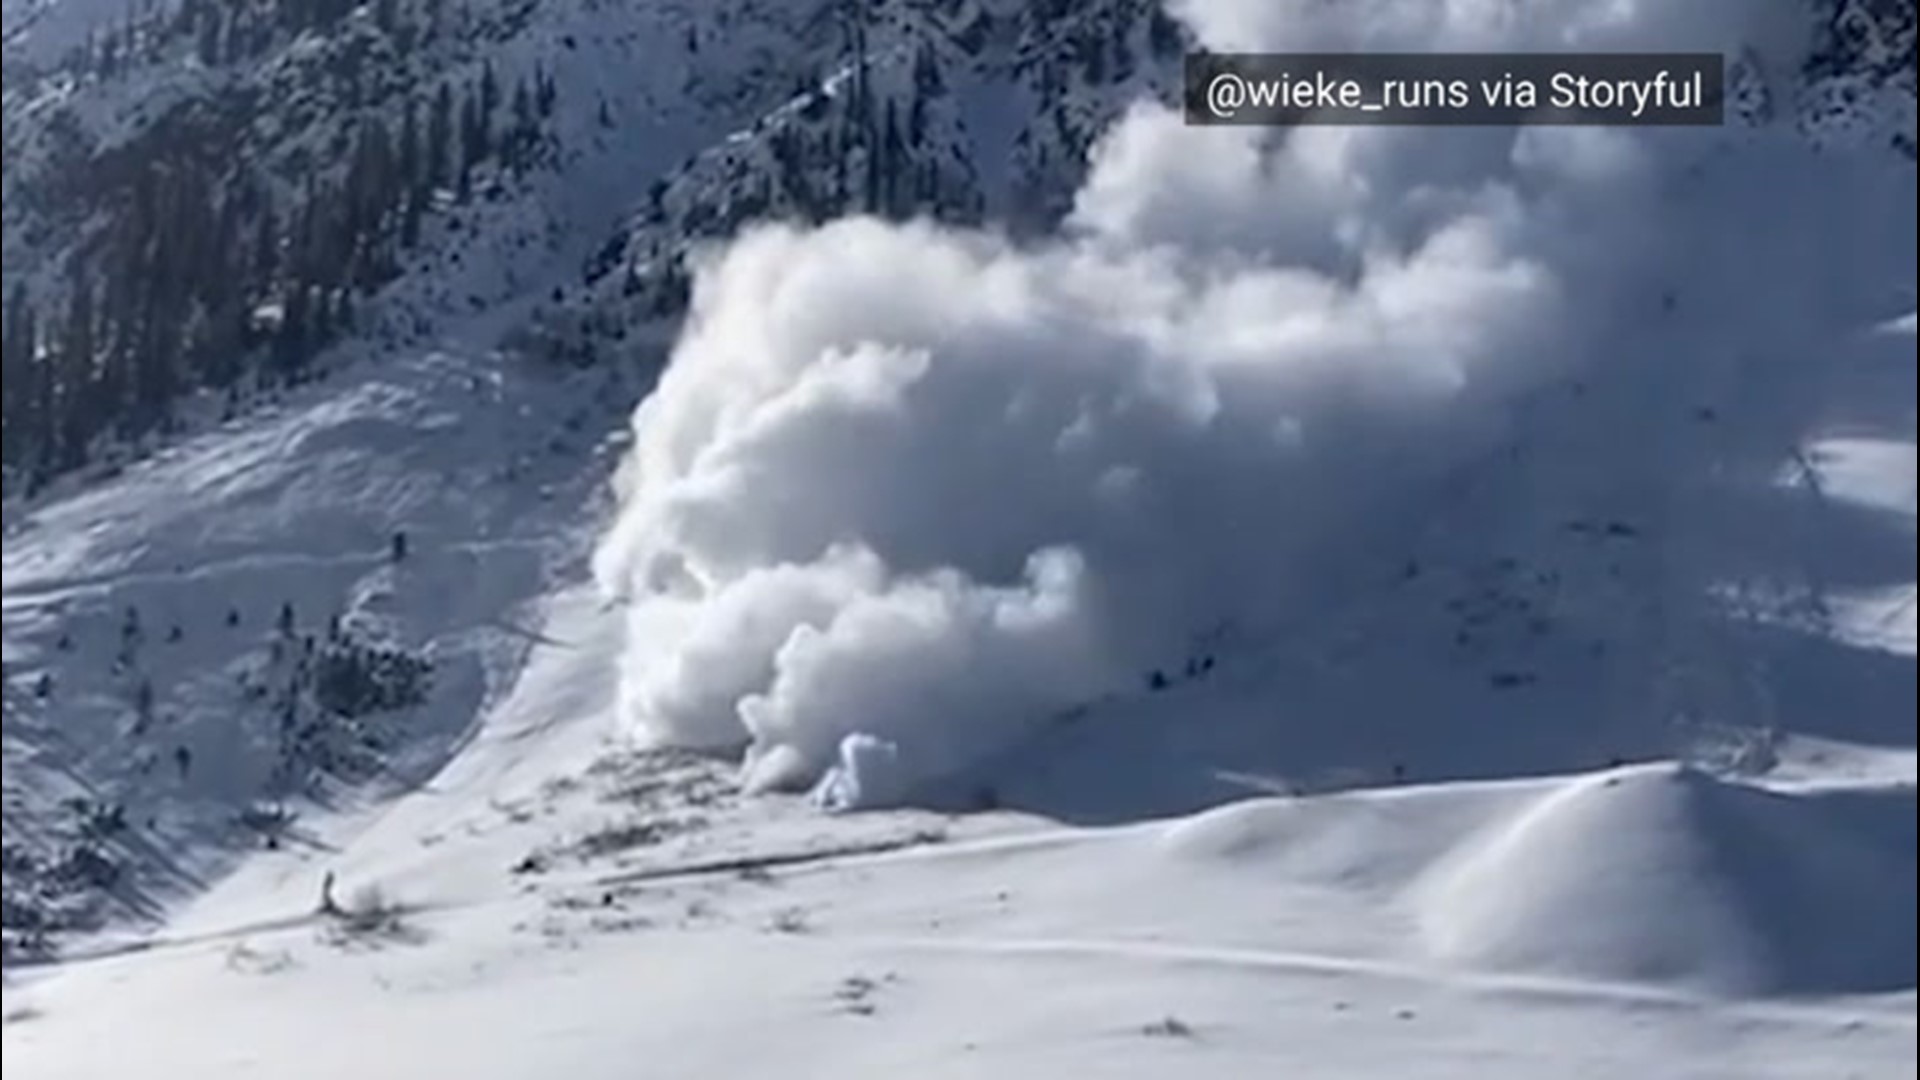 Experts say dry conditions in the fall have caused a loose underlying snow layer, making avalanches more likely.